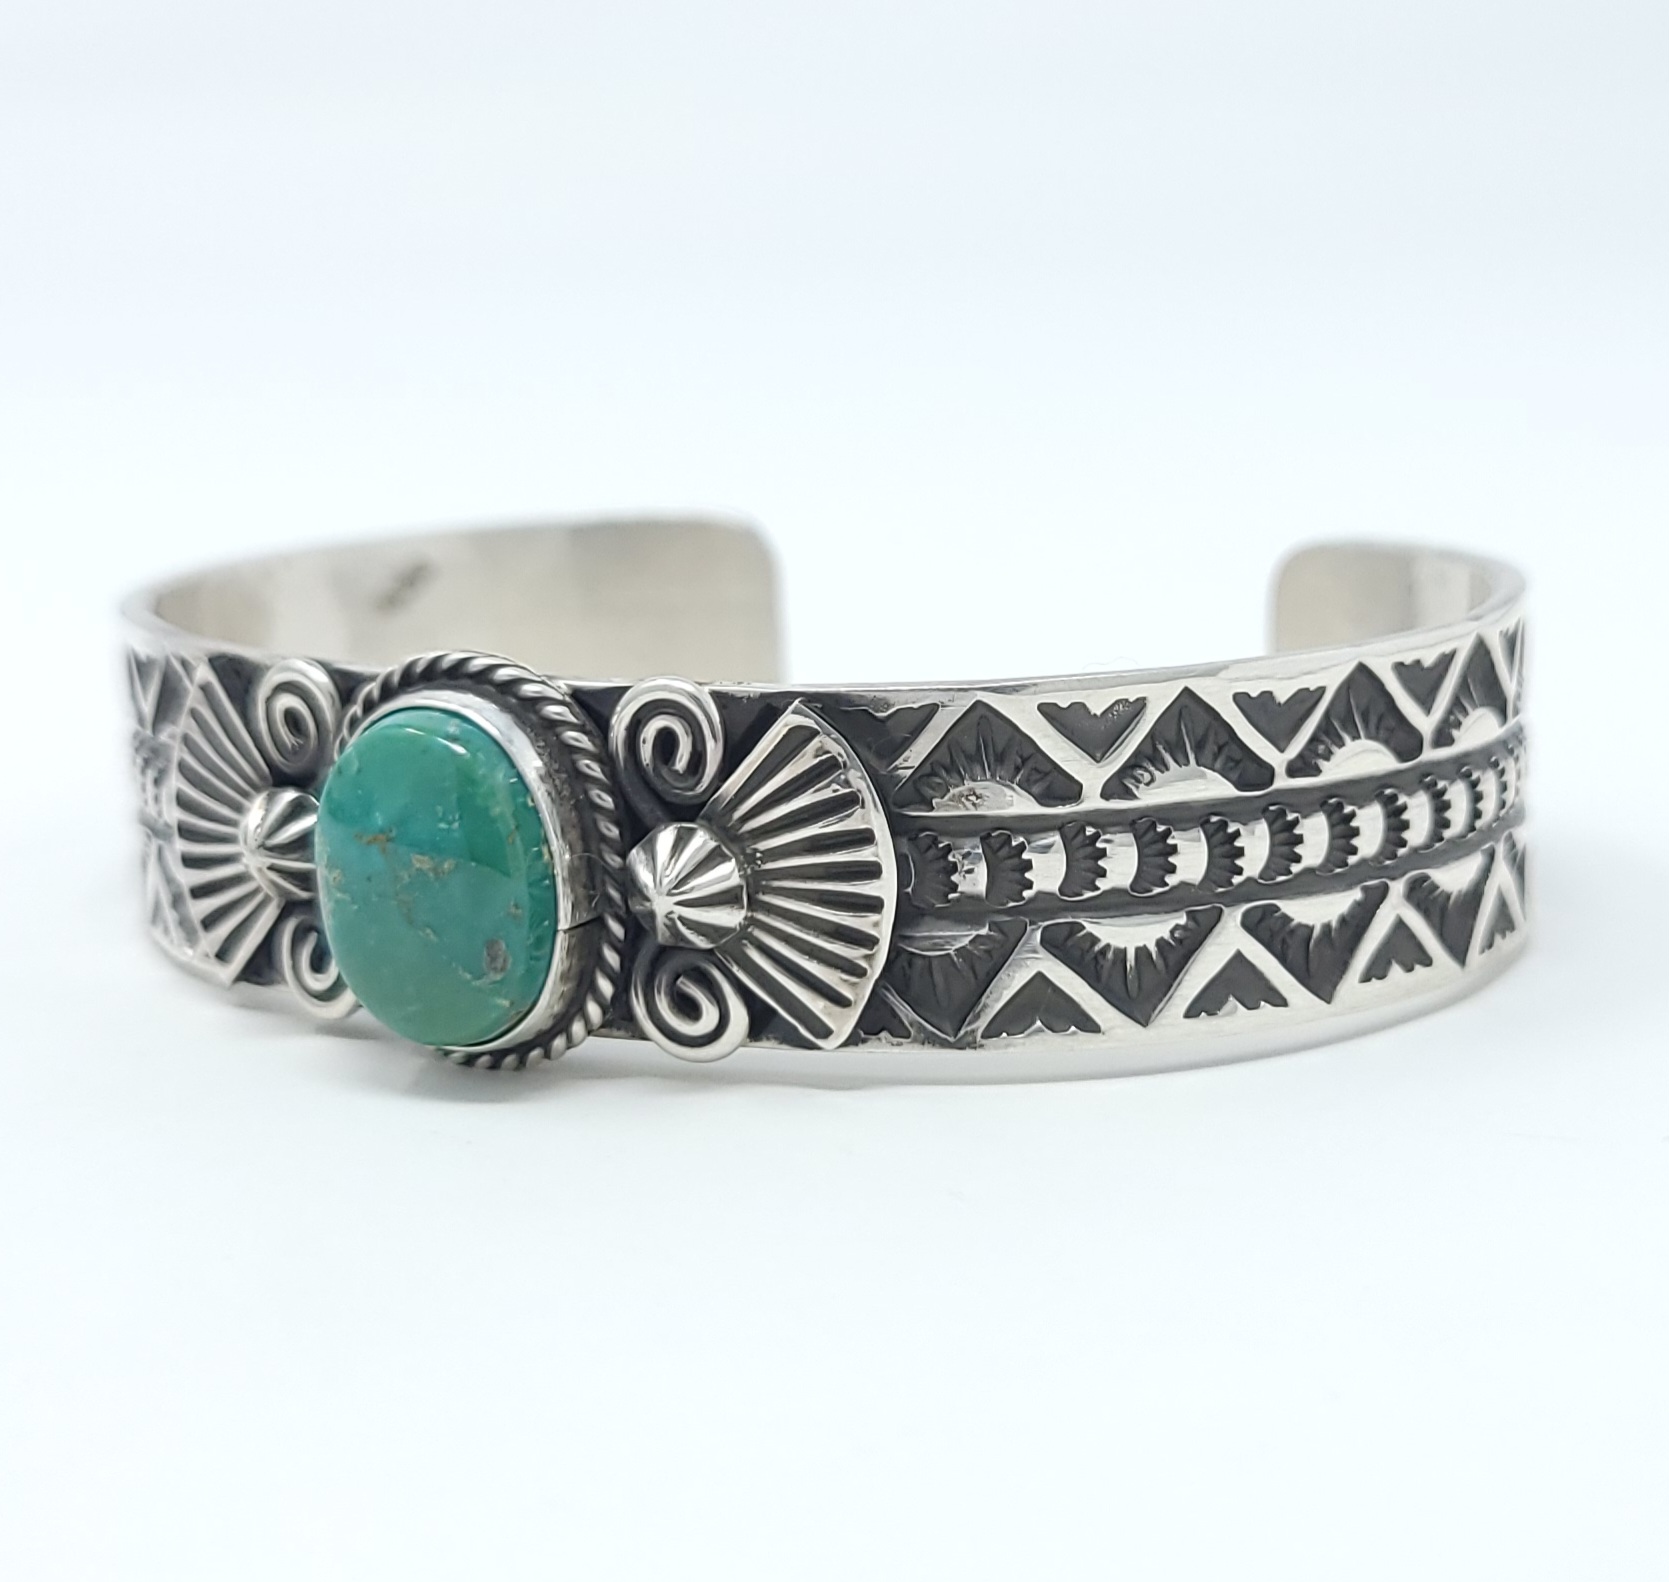 Andy Cadman Navajo Sterling Silver Stacker Style Bracelet Green Tree Turquoise